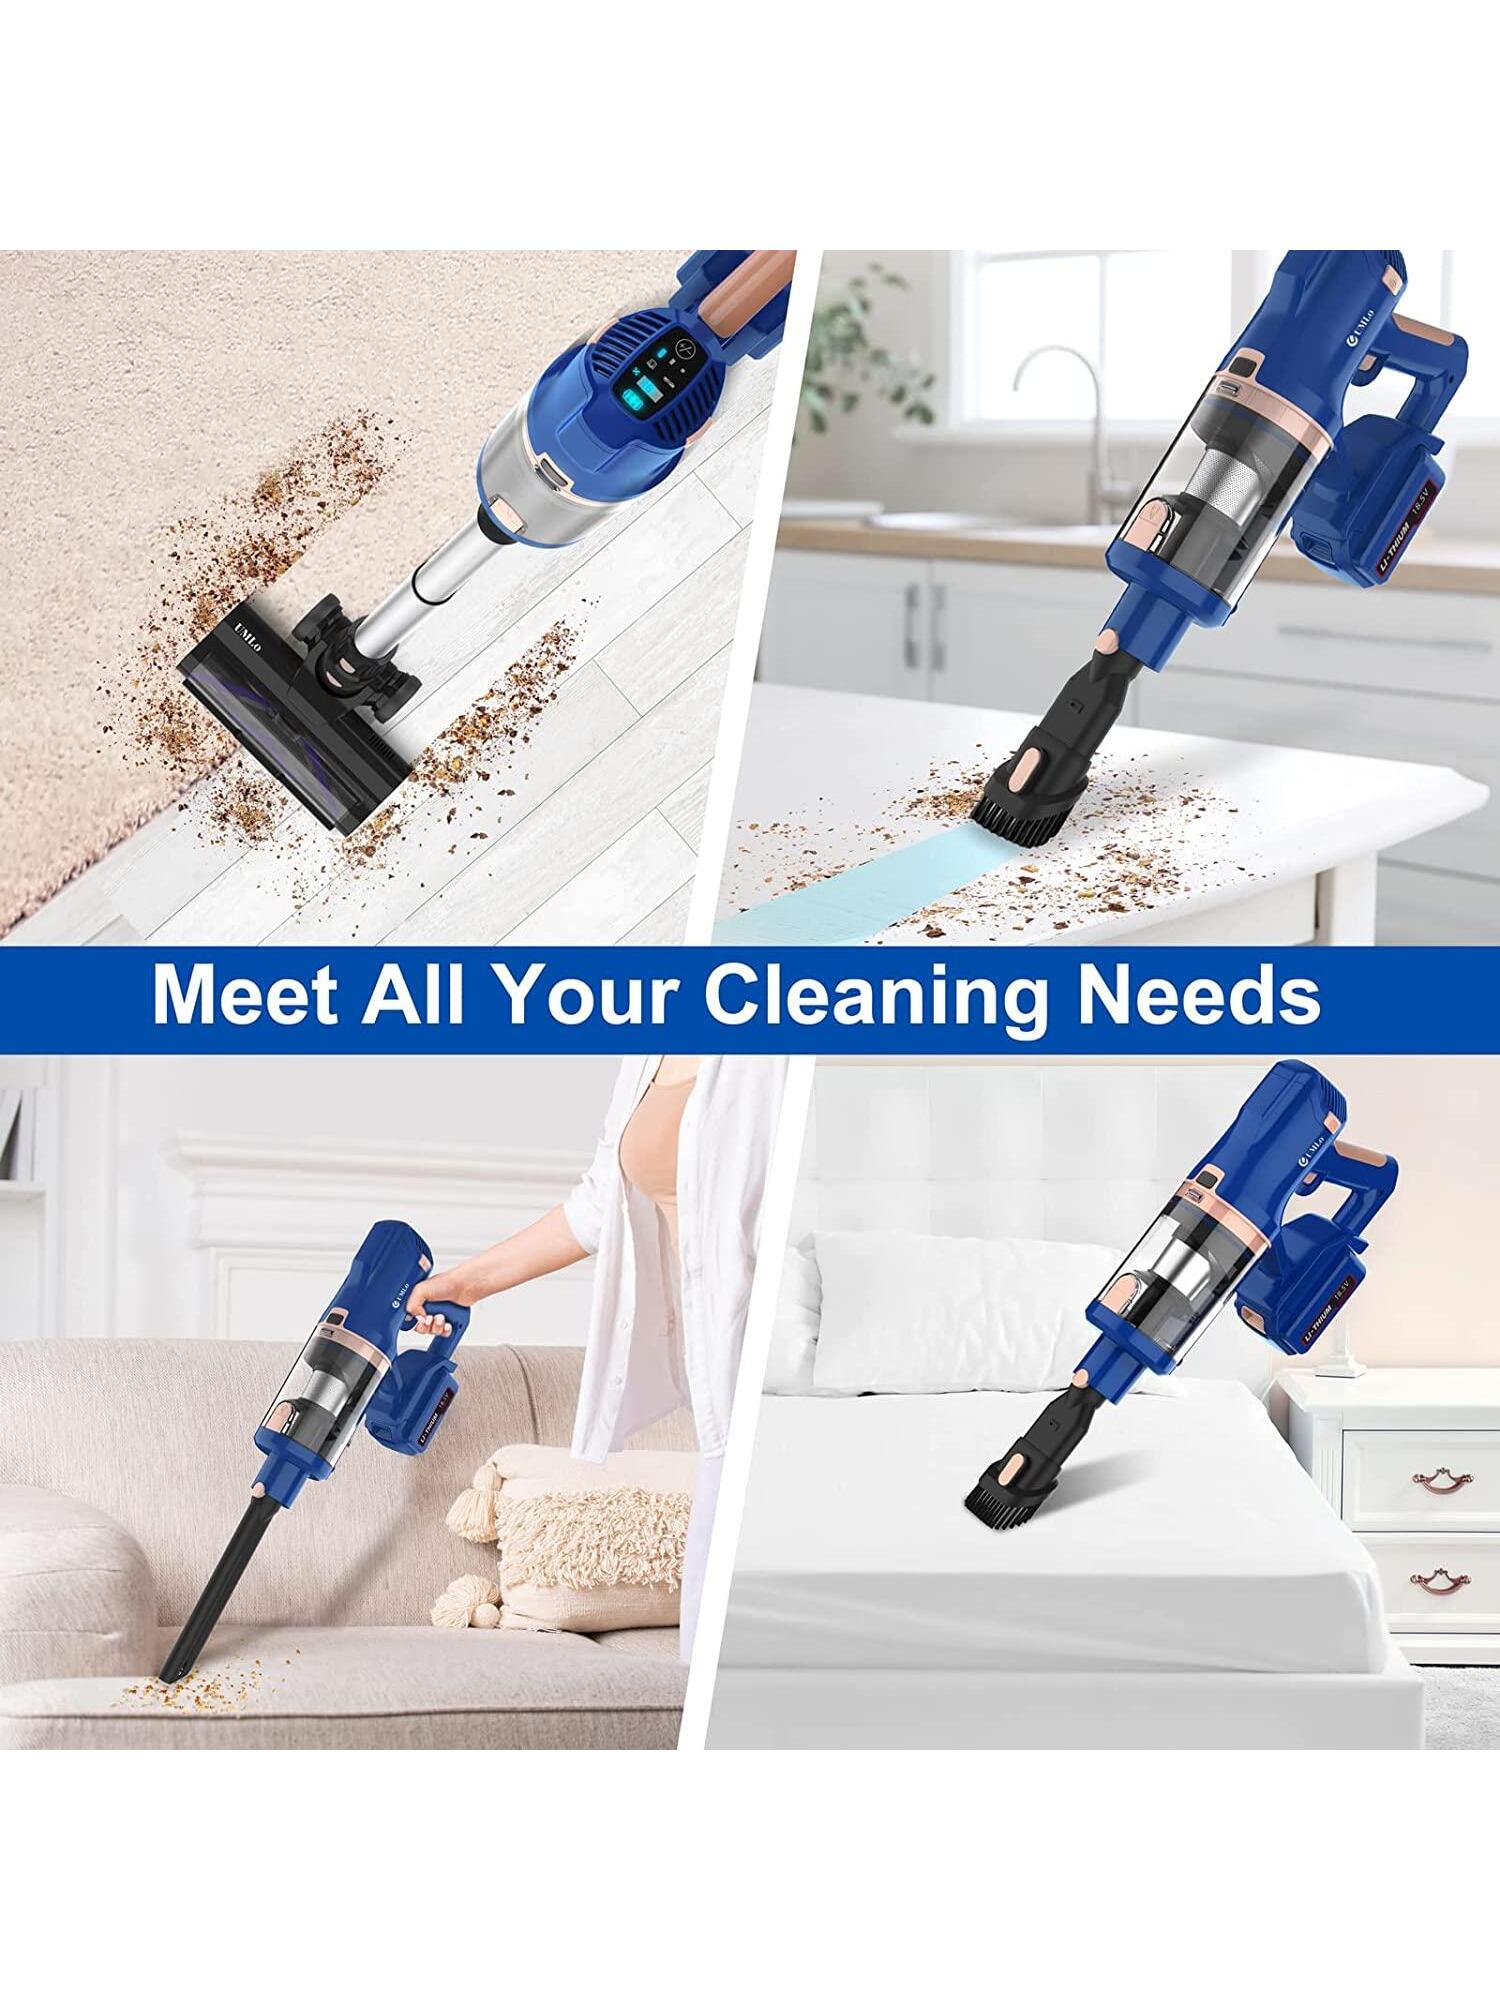 UMLo Cordless Vacuum Cleaner, 300W 28Kpa Cordless Stick Vacuum with LED Display, Up to 60mins Runtime, 4000mAh Battery Cordless Vacuum, 6 in 1 Lightweight Vacuum for Pet Hair Carpet Hard Floor